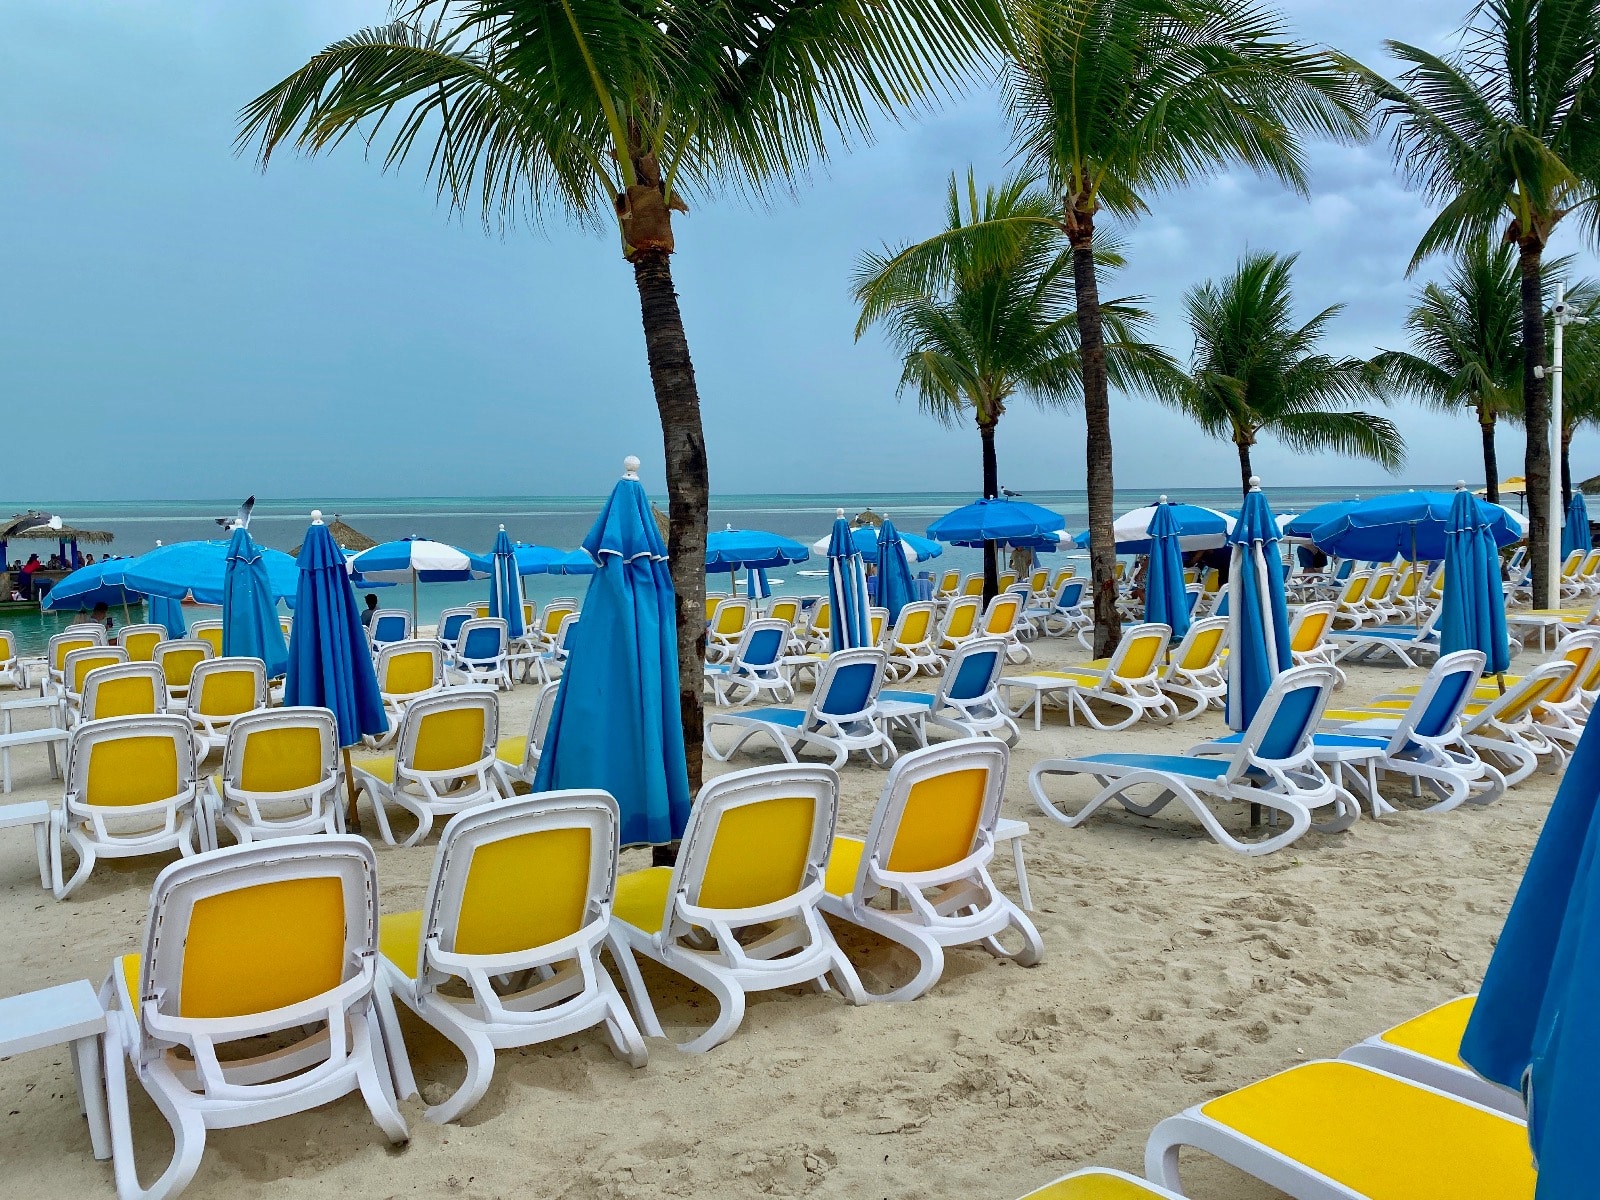 a beach with palm trees and chairs and umbrellas